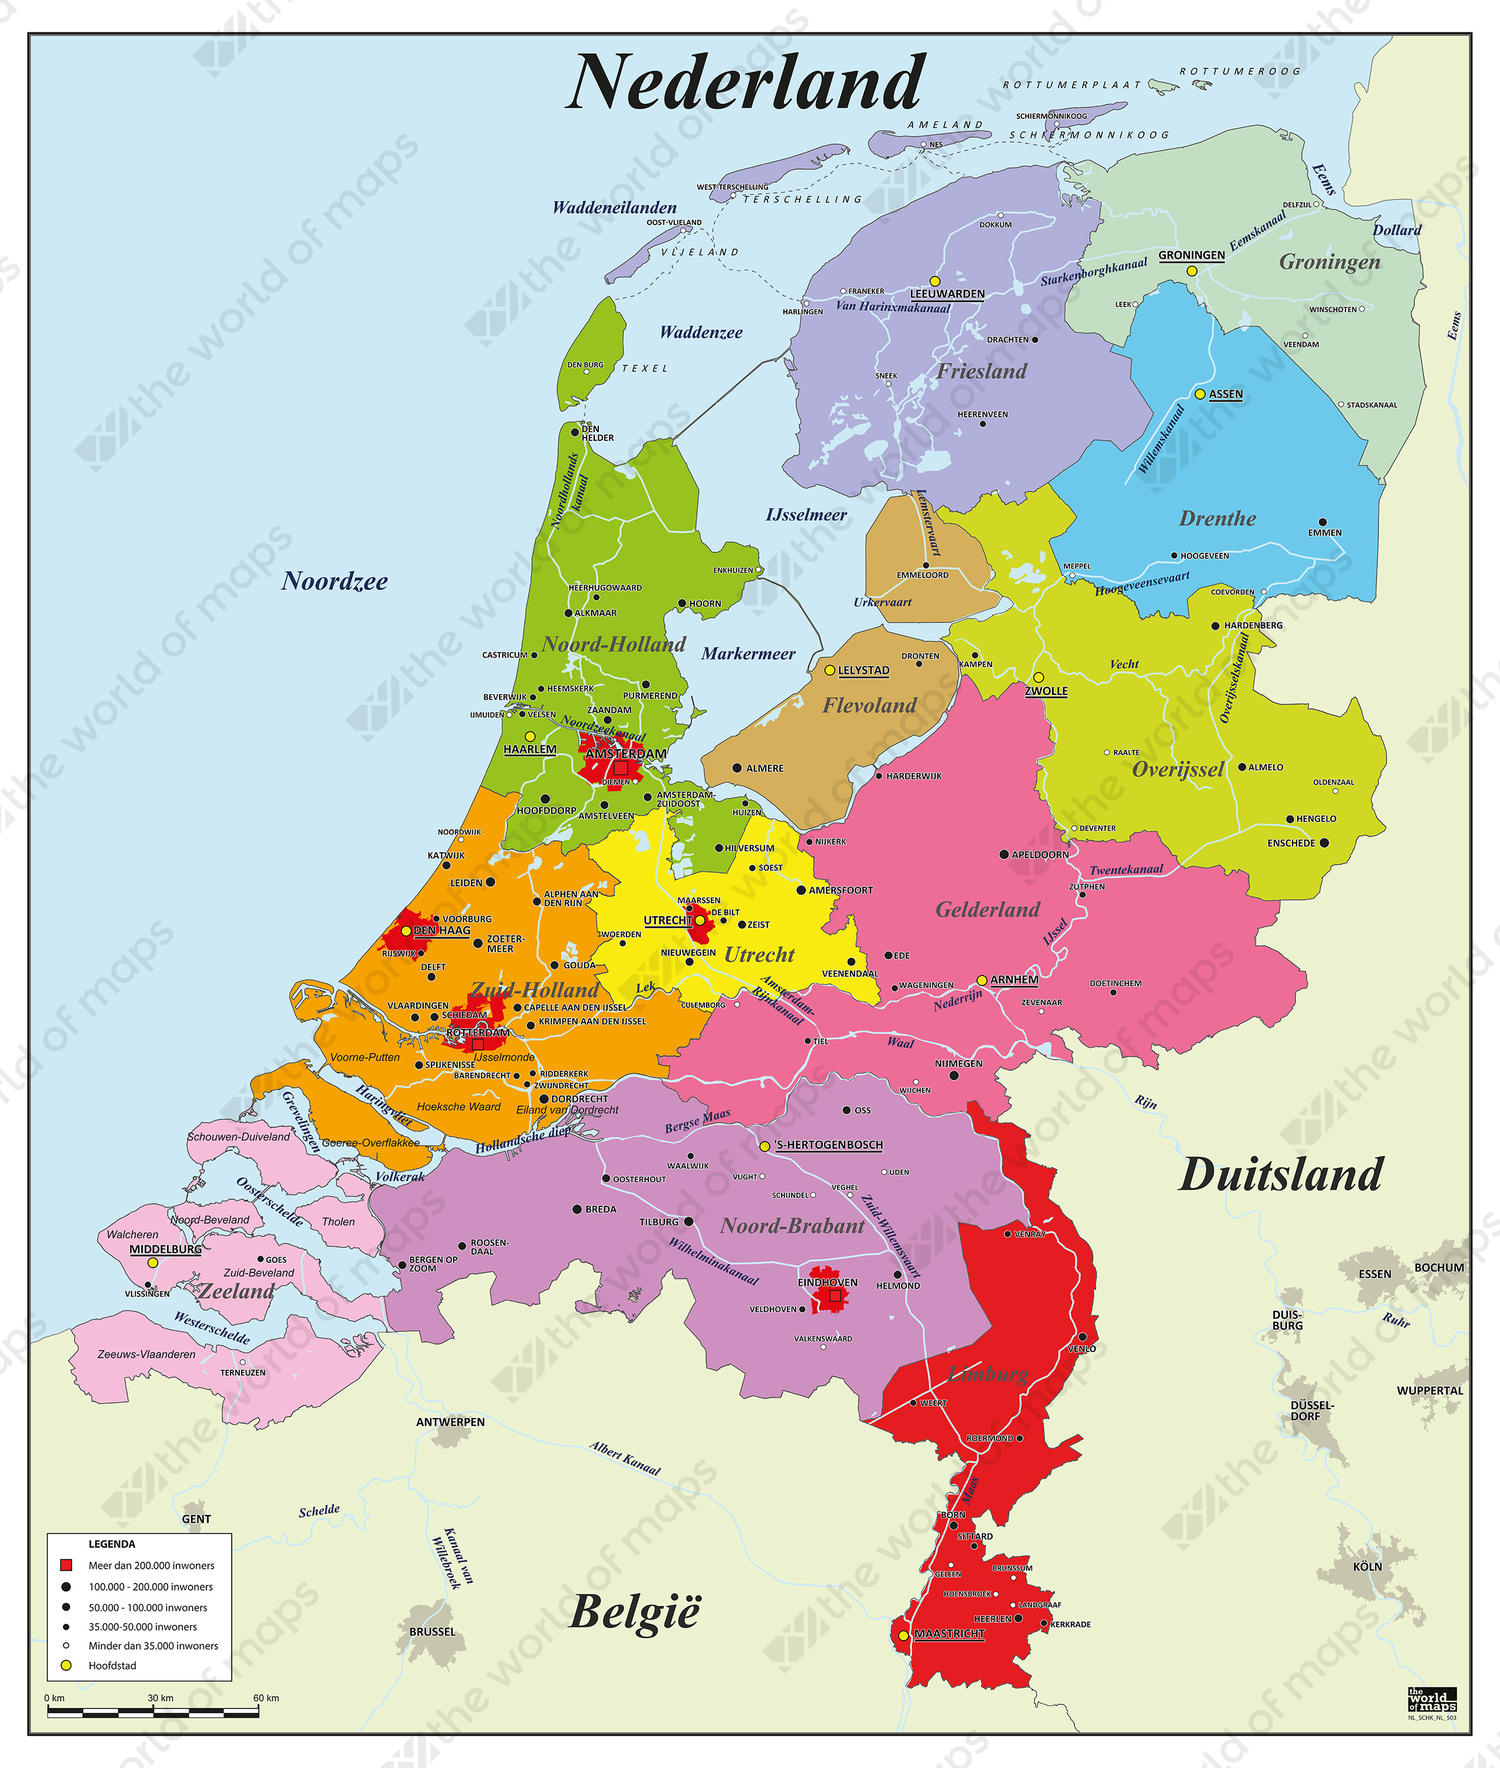 Digital basic county map of The Netherlands